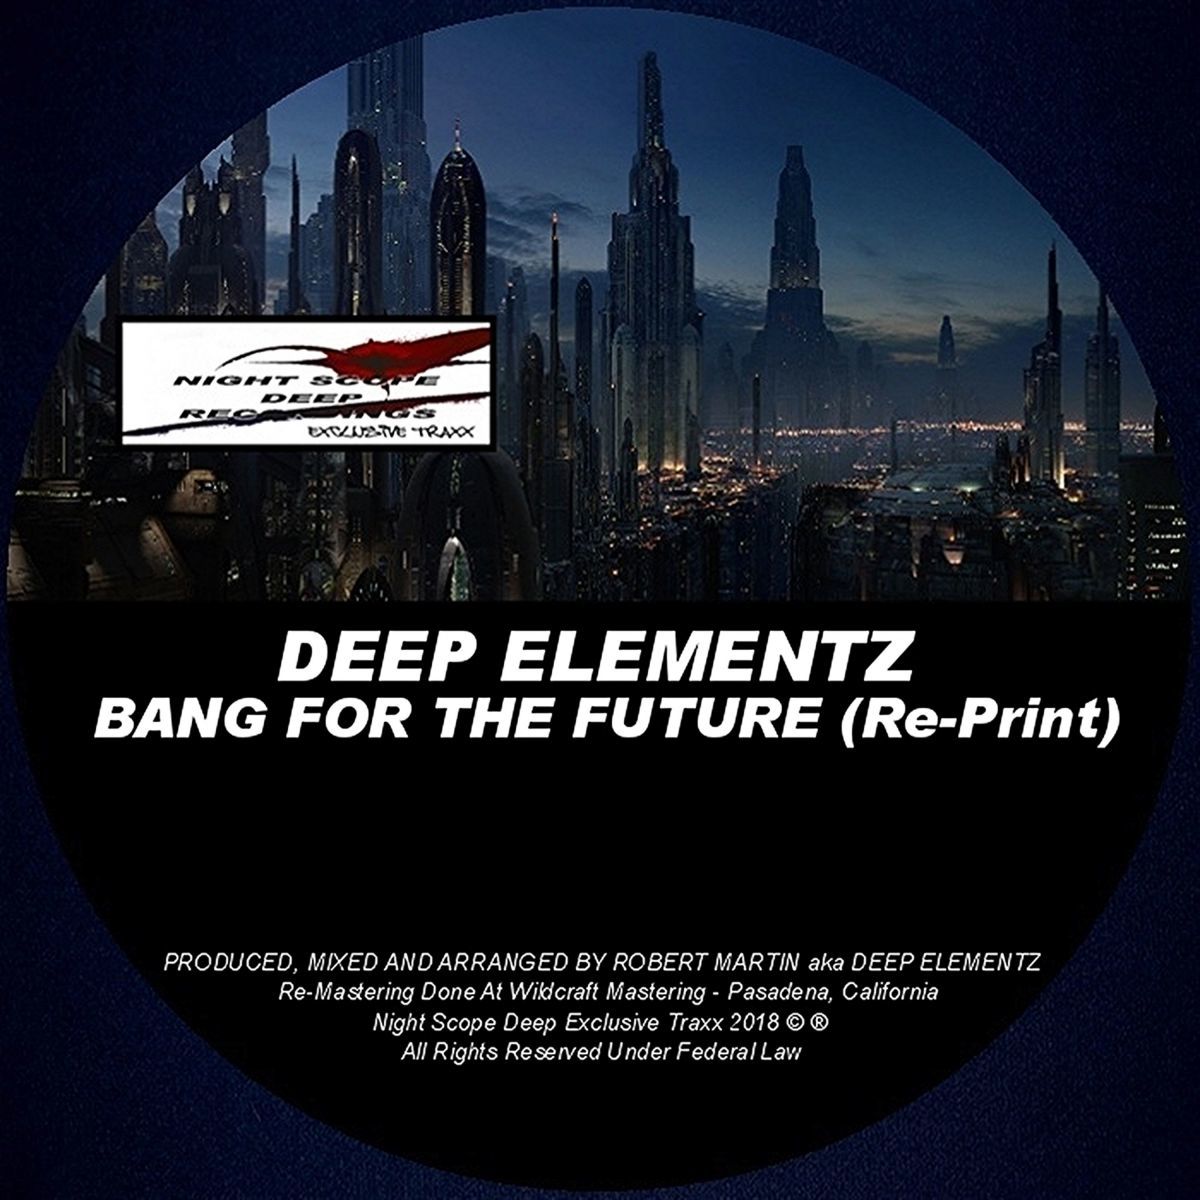 Deep Elementz - Bang For The Future (Re-Print) / Night Scope Deep Exclusive Traxx